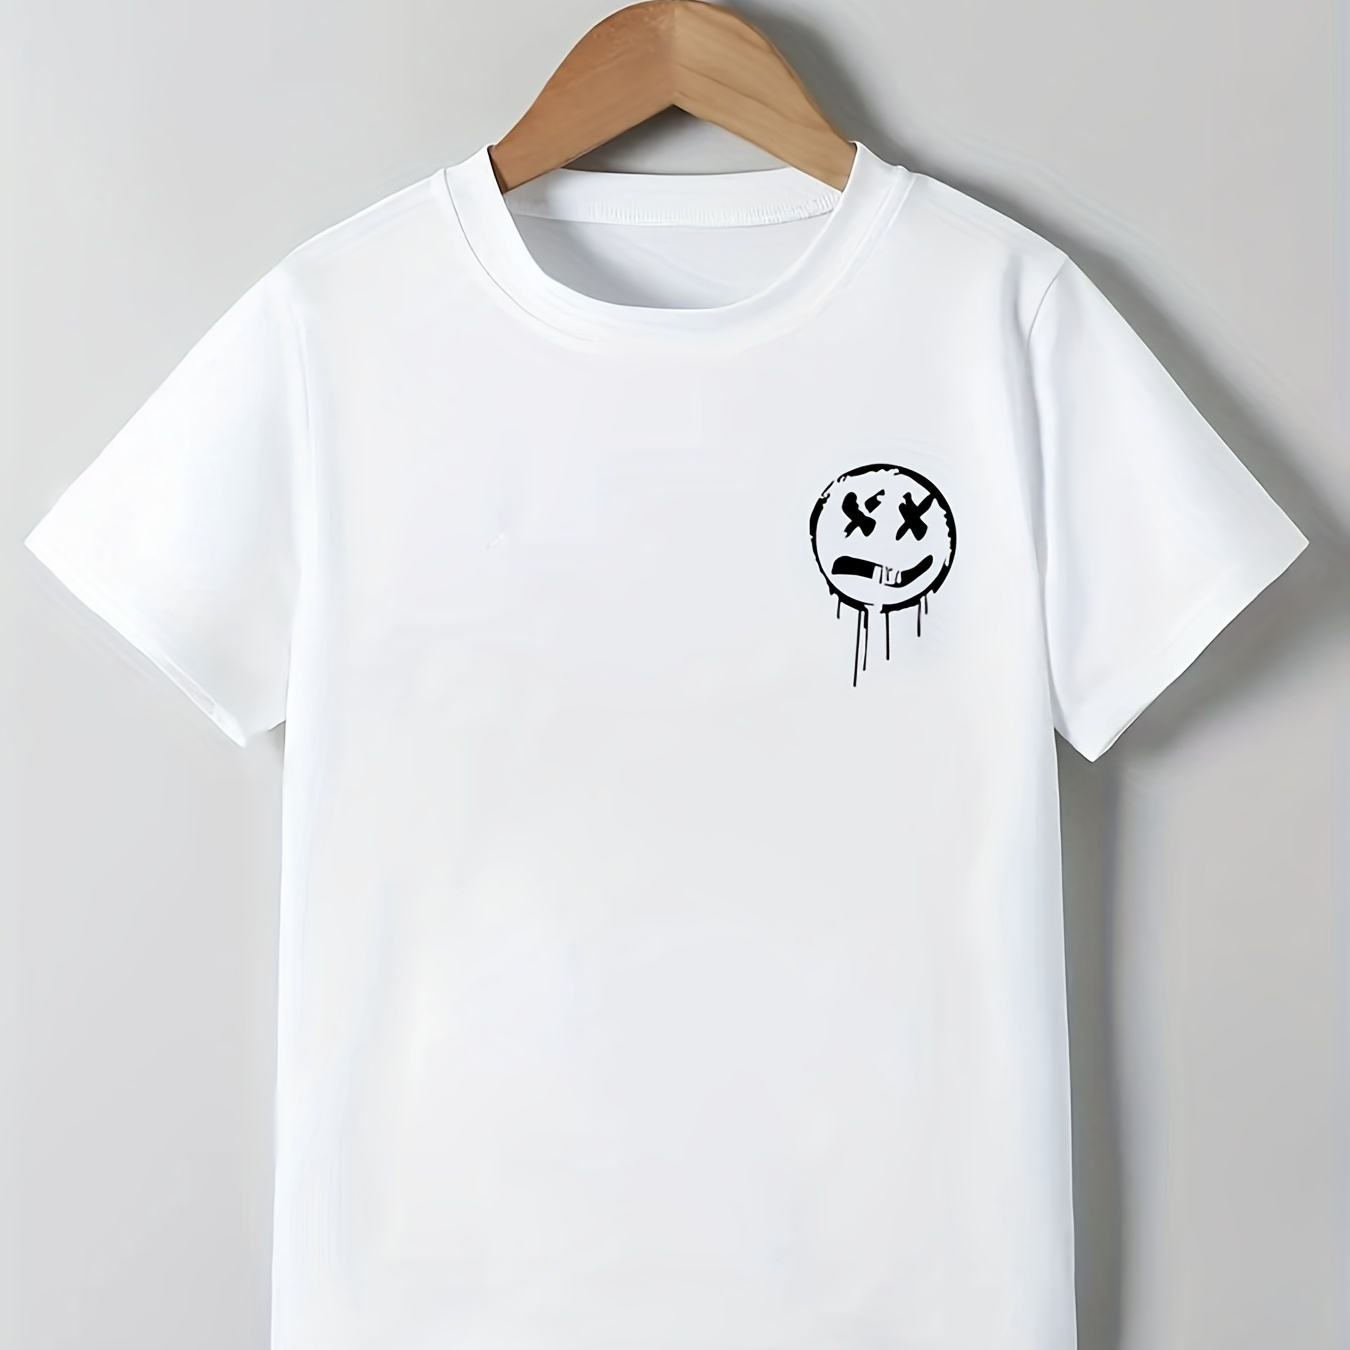 

Smiling Face Print Boys Creative T-shirt, Casual Lightweight Comfy Short Sleeve Tee Tops, Kids Clothings For Summer